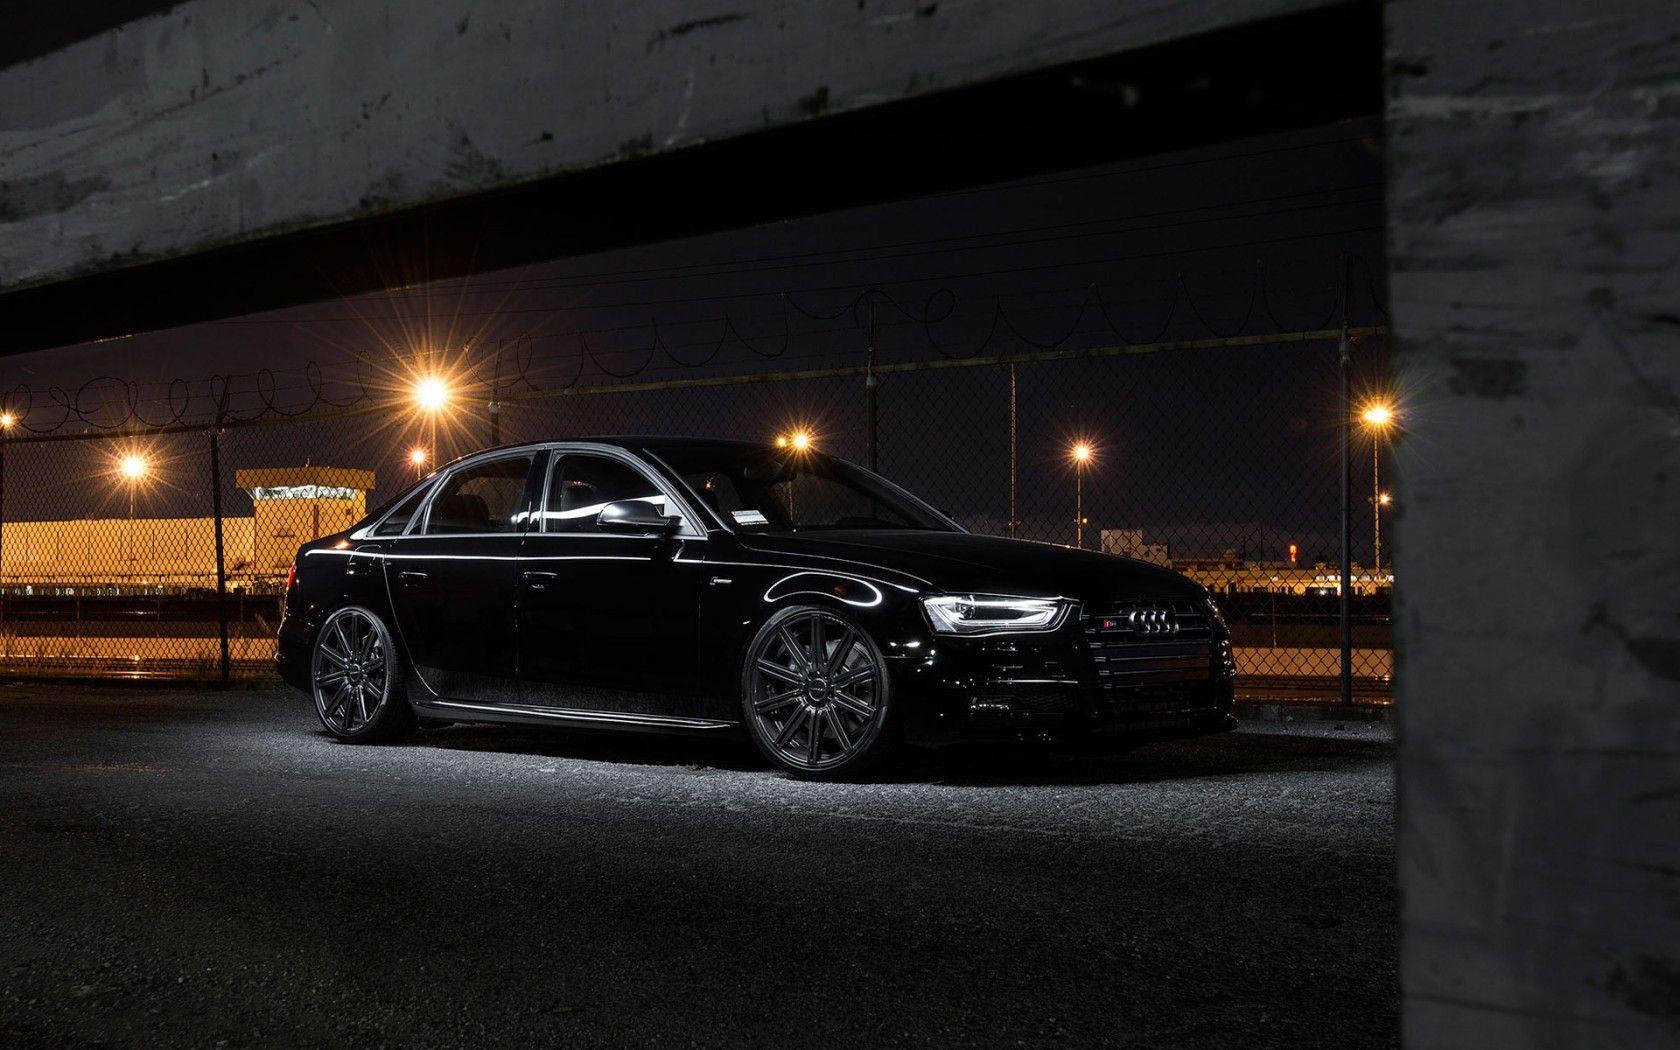 Audi S4 Wallpapers Top Free Audi S4 Backgrounds Wallpaperaccess